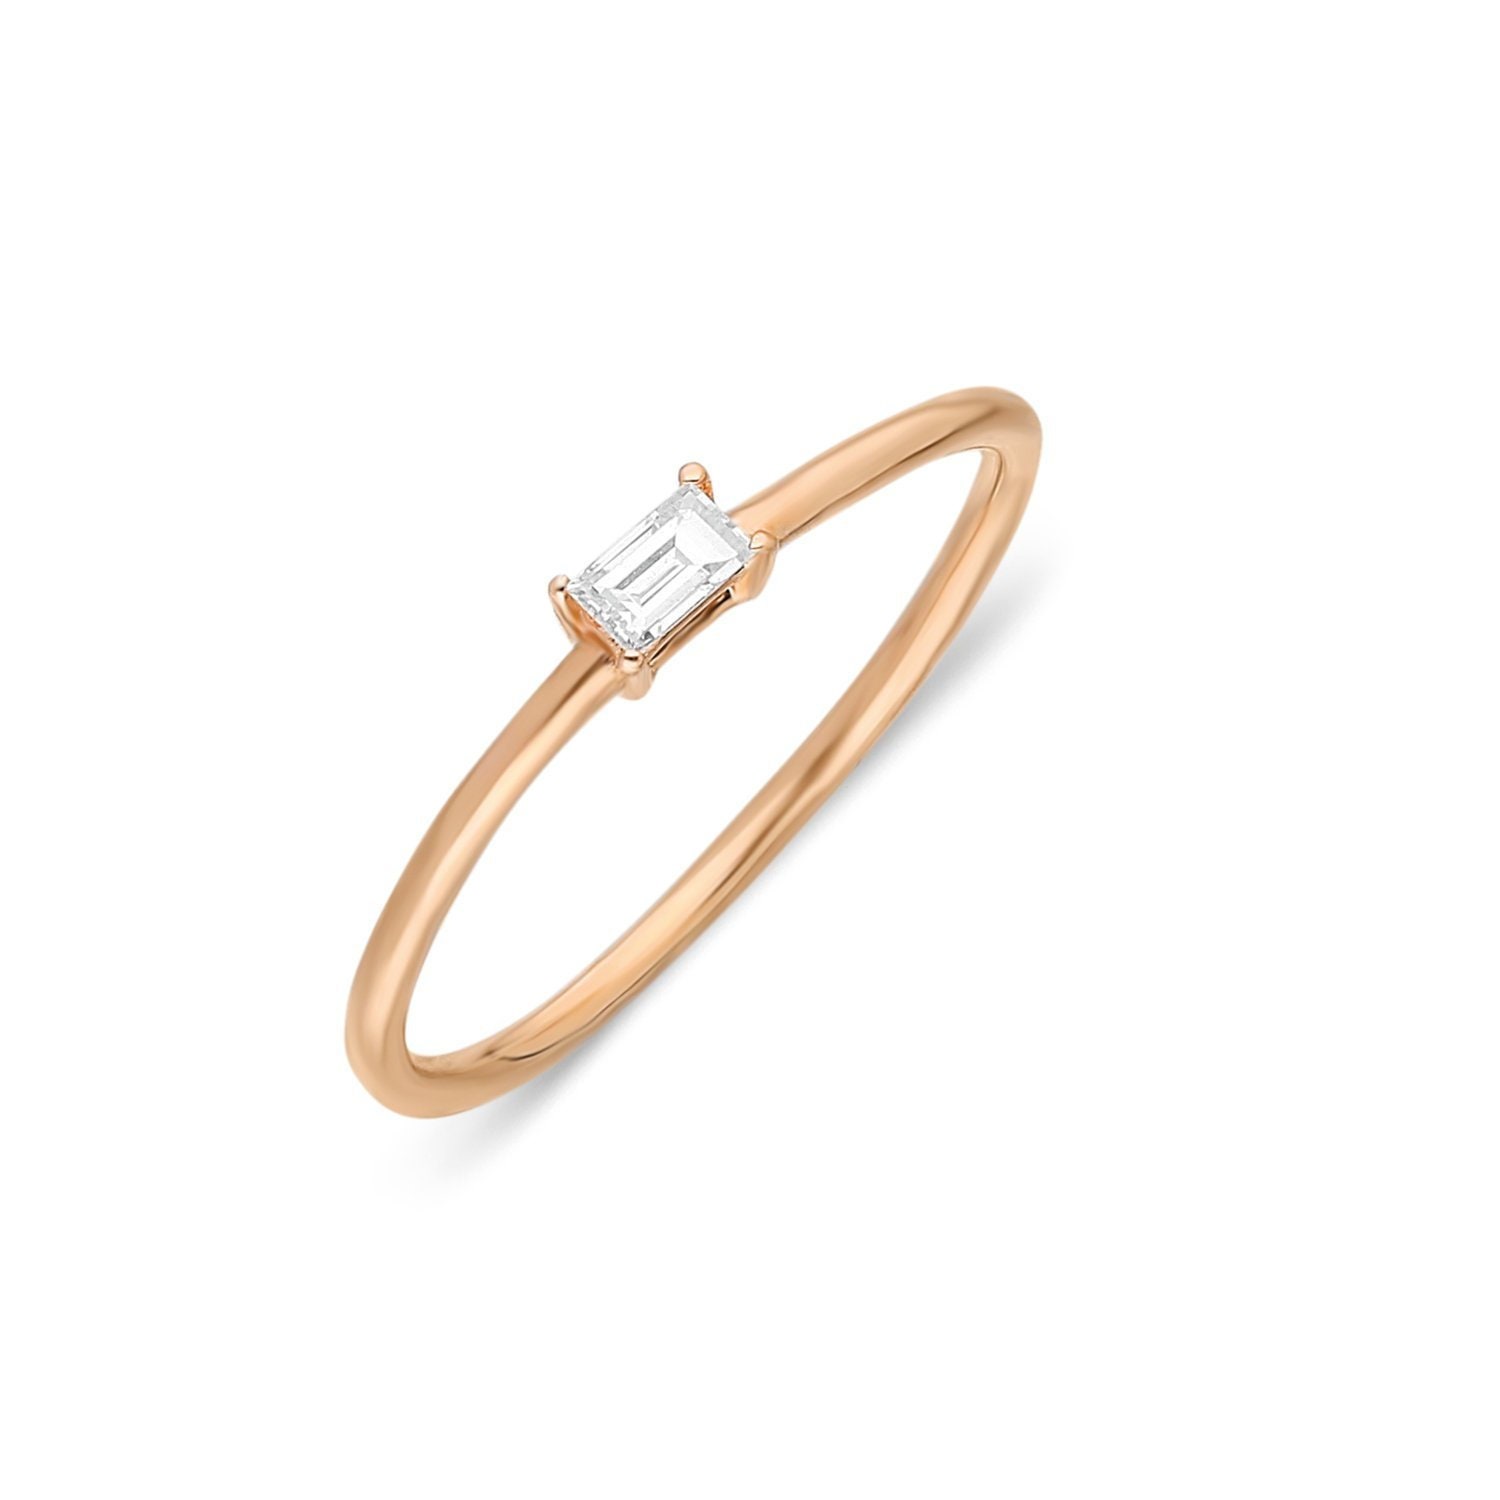 Baguette Diamond Solitaire Ring, Mini Cut Band, Handcrafted Minimalist Dainty Simple Single Stone Ring